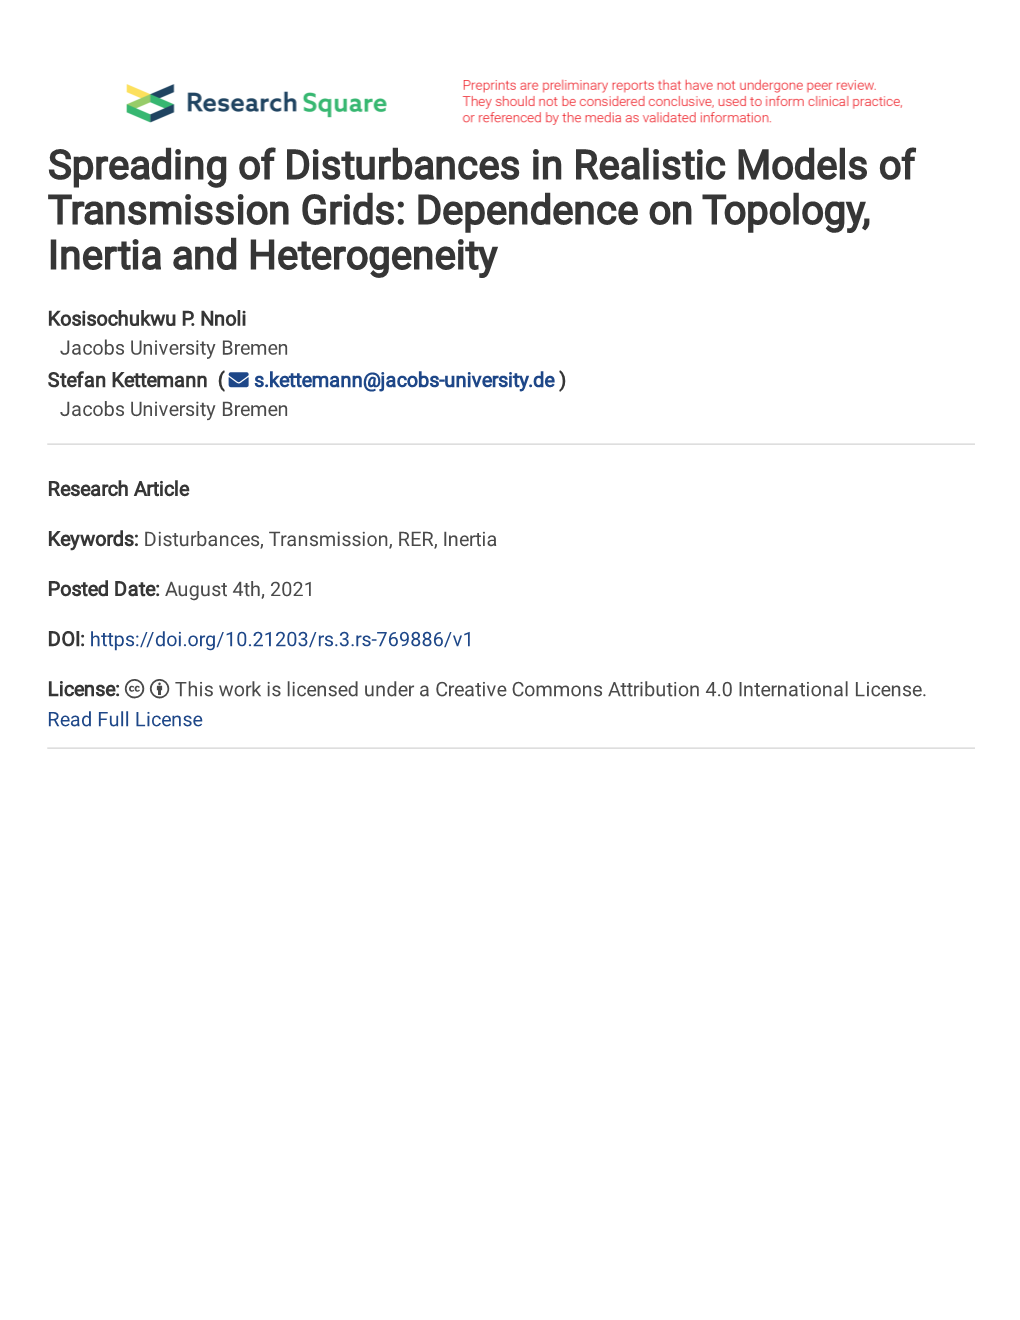 Spreading of Disturbances in Realistic Models of Transmission Grids: Dependence on Topology, Inertia and Heterogeneity